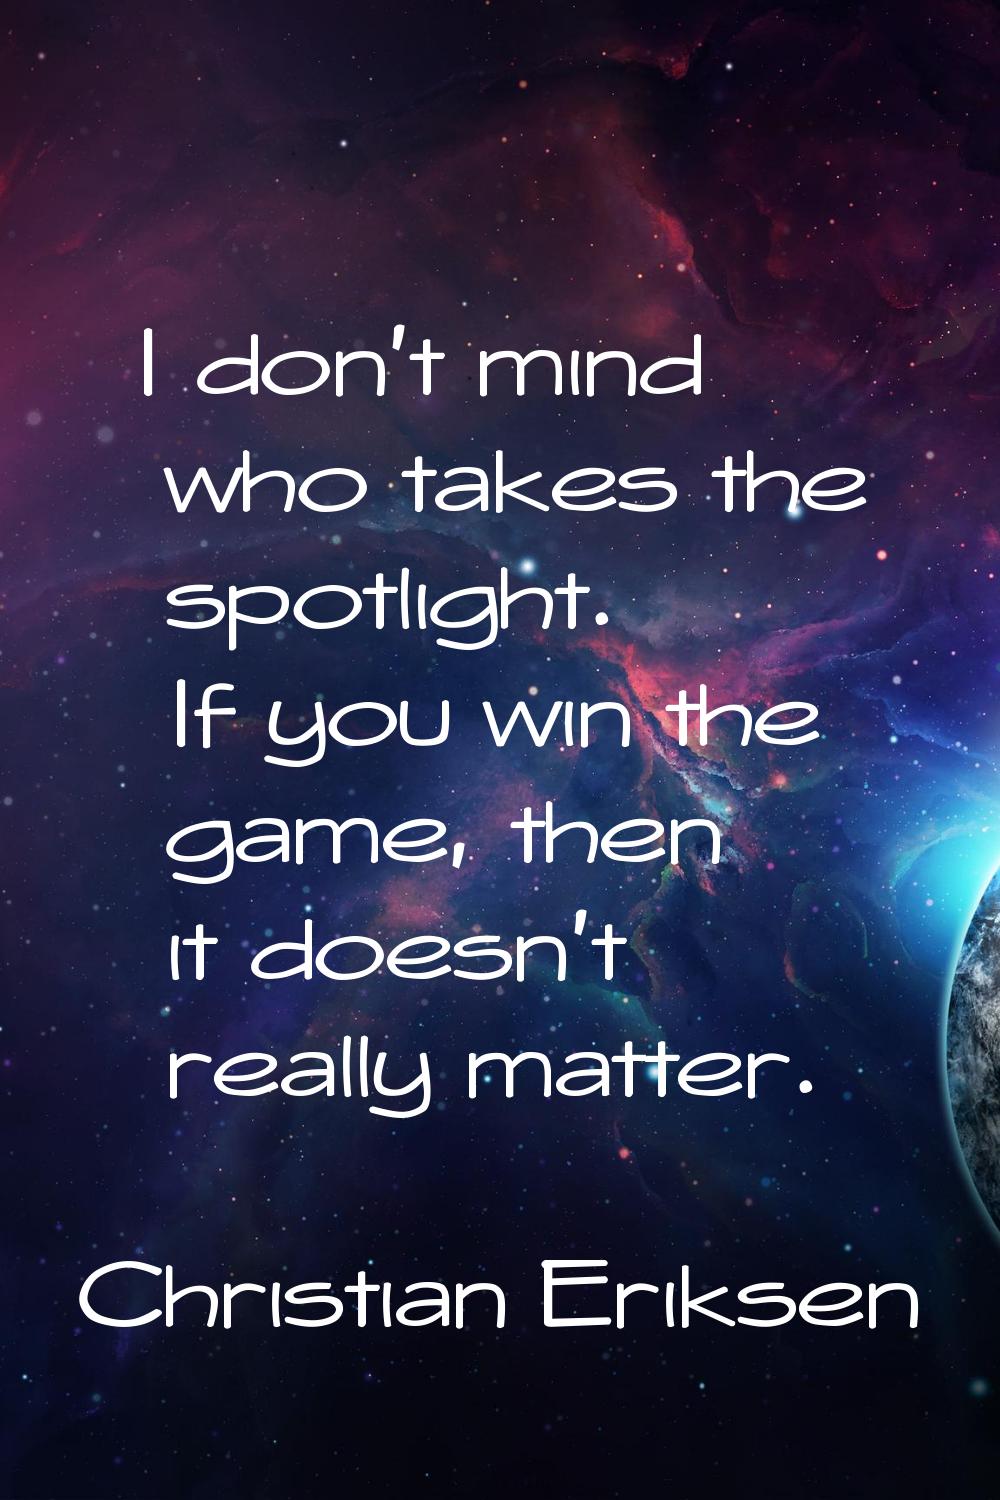 I don't mind who takes the spotlight. If you win the game, then it doesn't really matter.